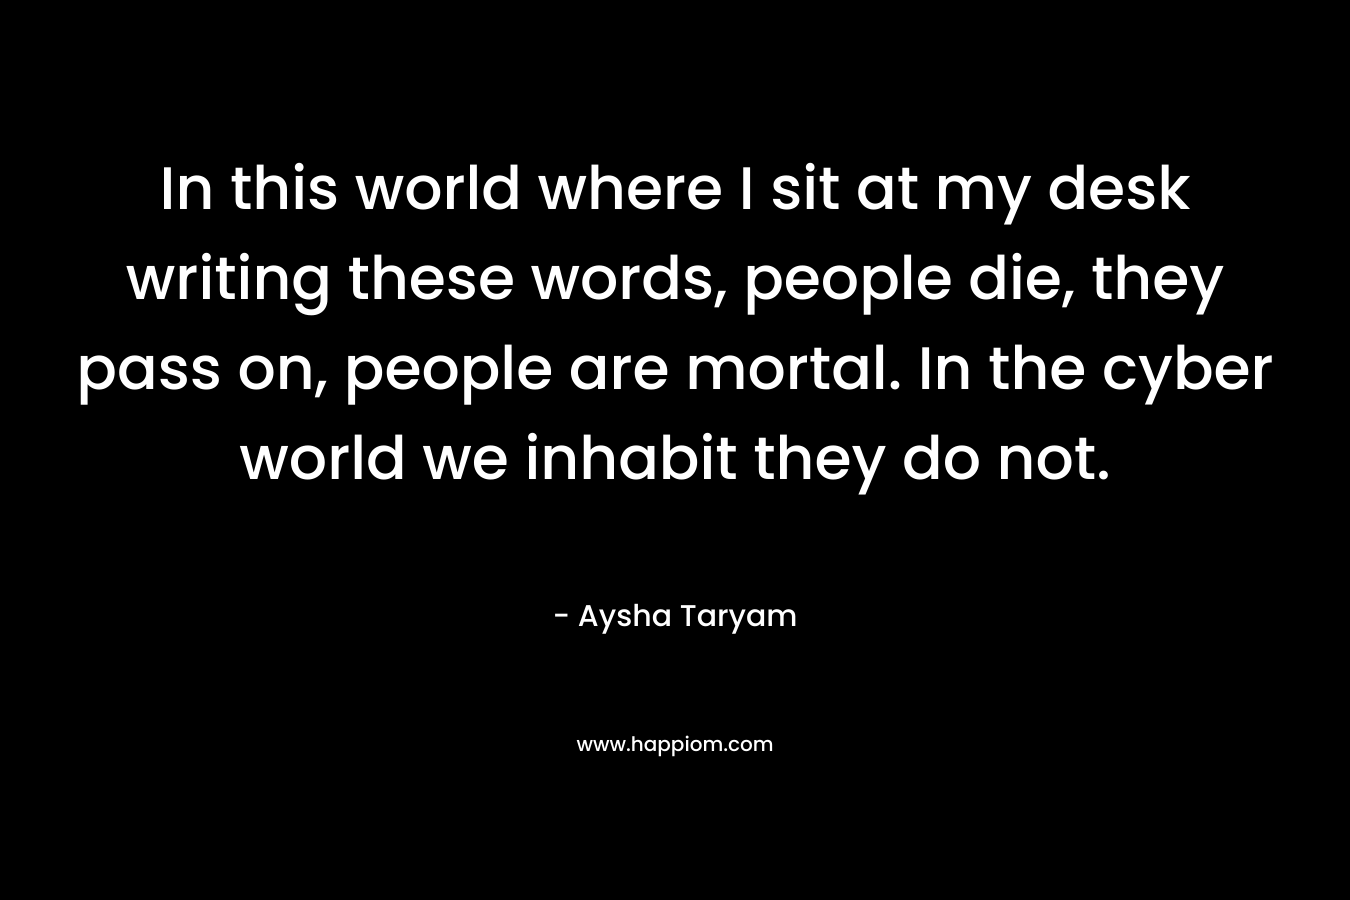 In this world where I sit at my desk writing these words, people die, they pass on, people are mortal. In the cyber world we inhabit they do not.